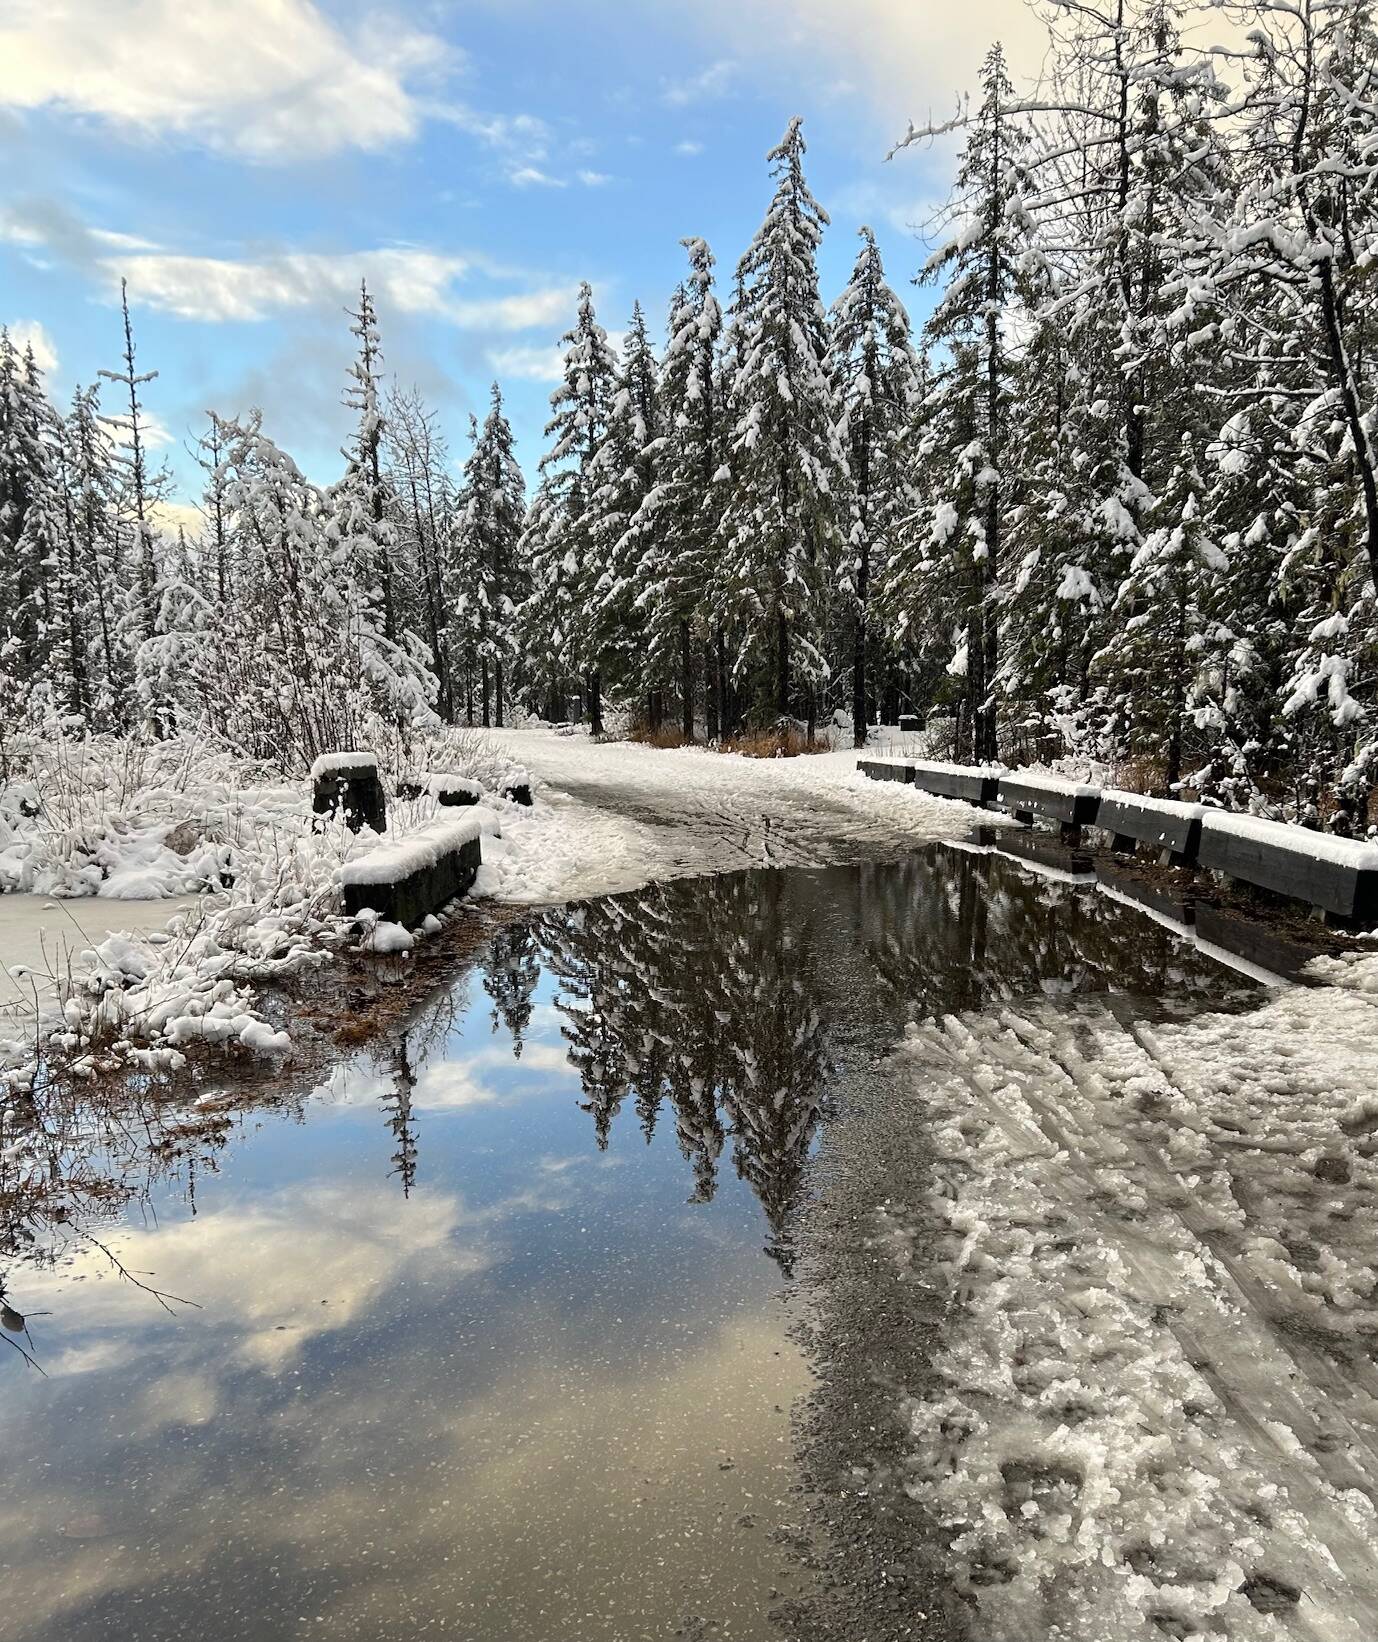 A reflection on water at Mendenhall Campground on Dec. 16. (Photo by Deborah Rudis)